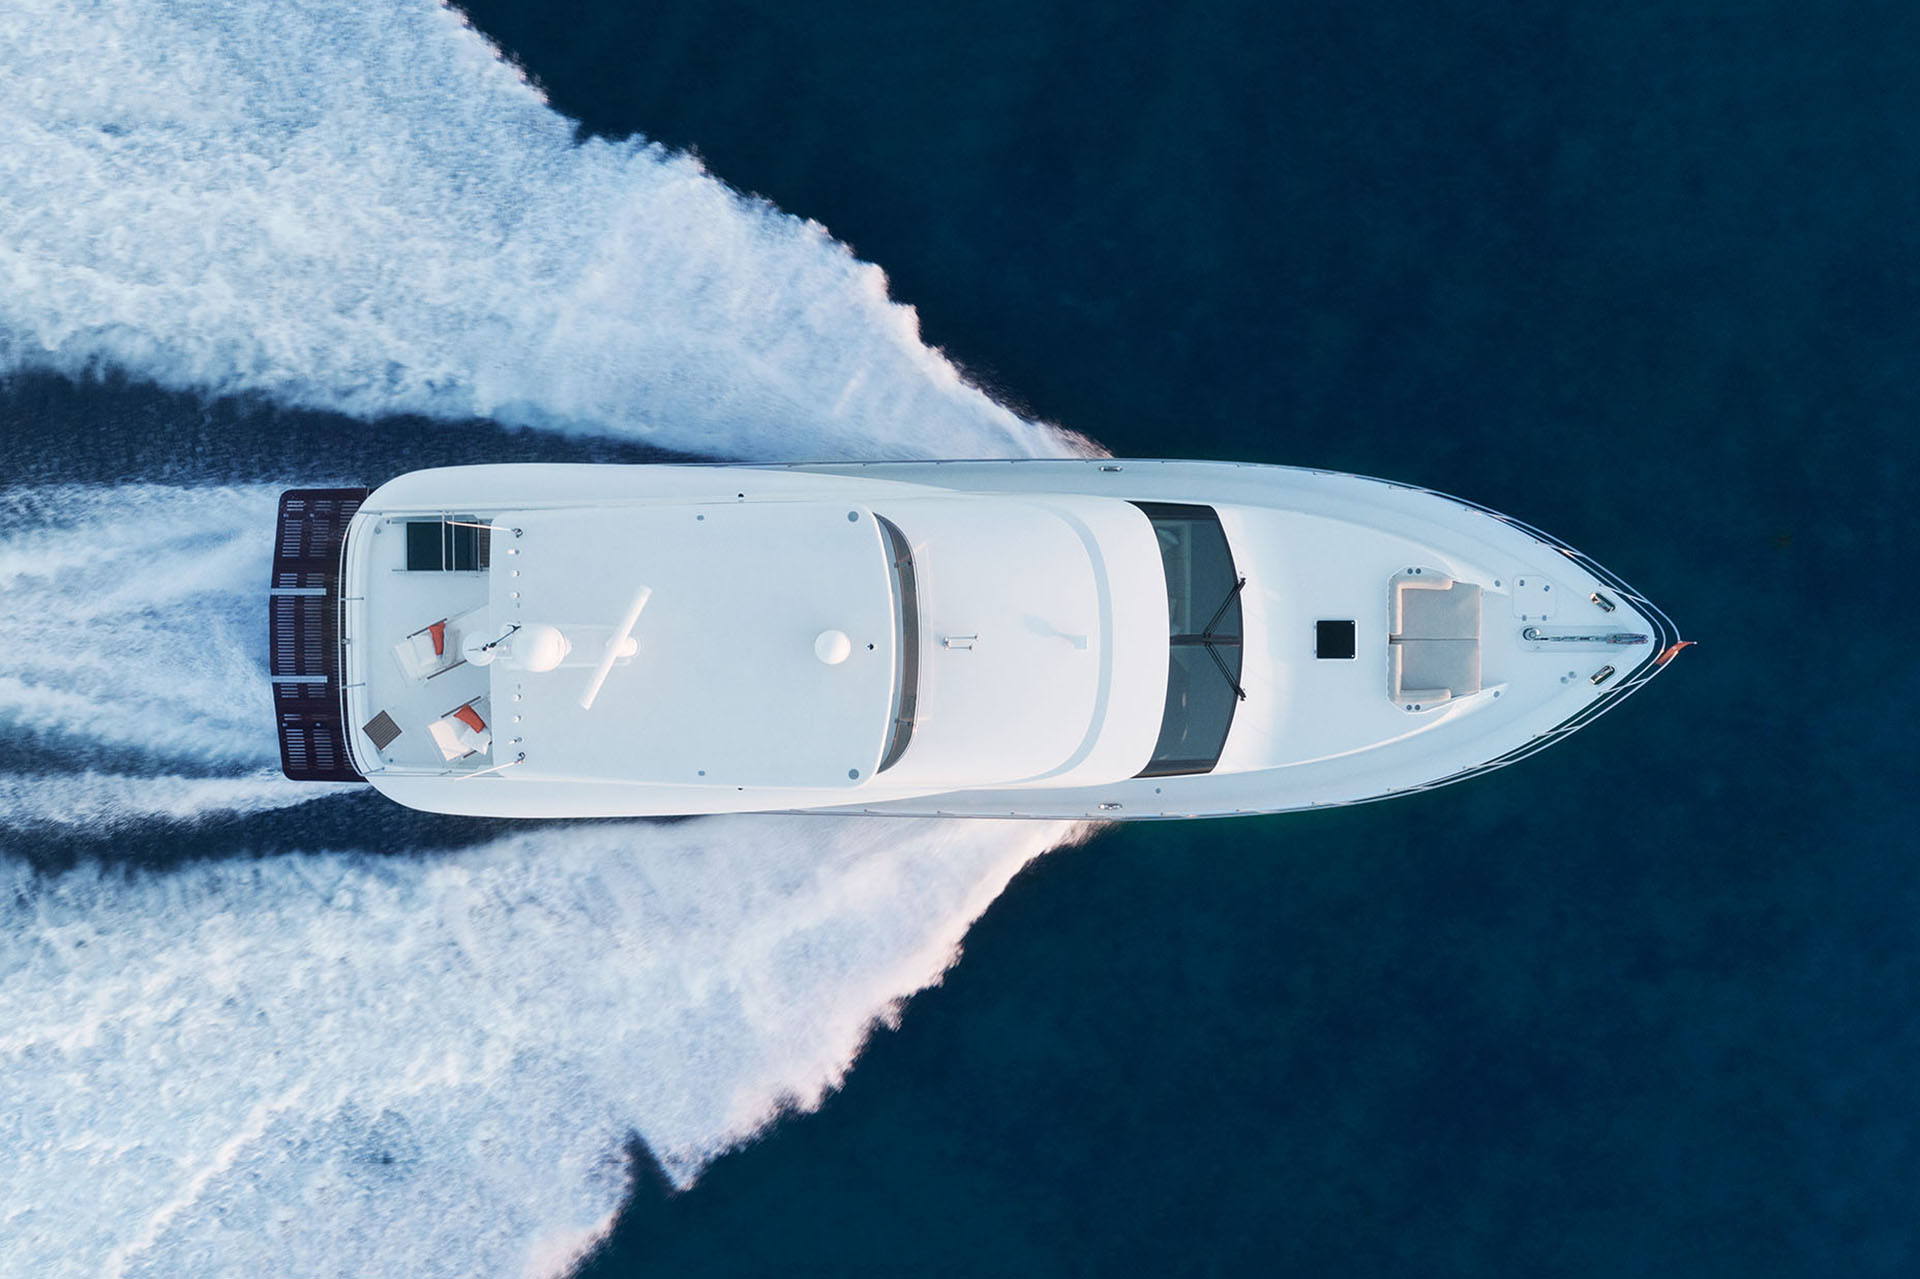 Media and Events | CL Yachts